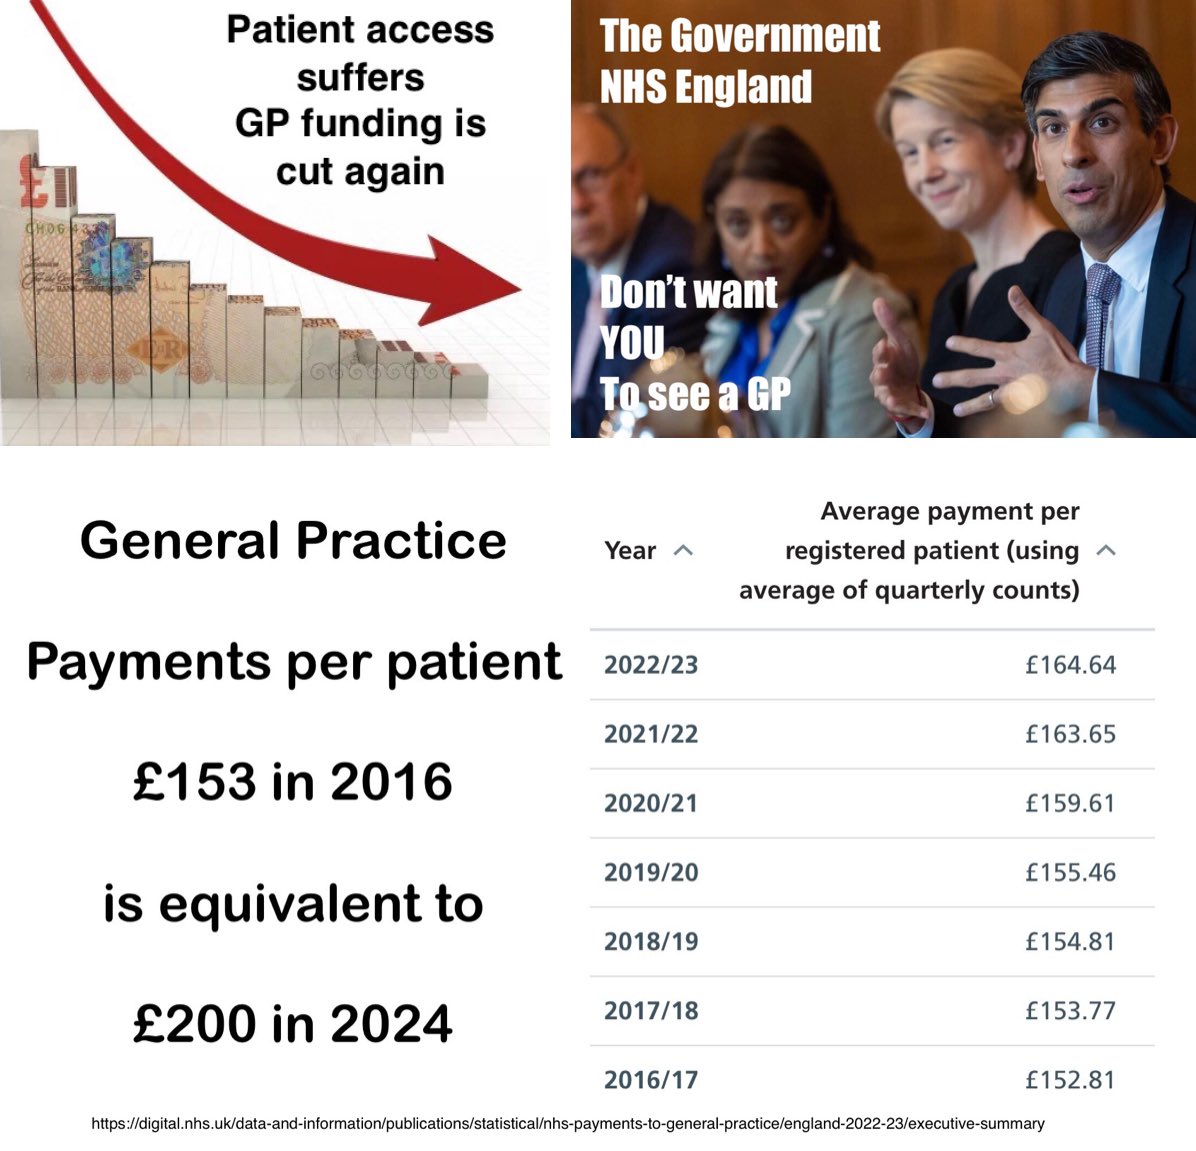 The failure of Govt & NHS England is a failure to understand primary care This failure stems from lack of knowledge & representation of Patients, GPs & Nurses Half the population a month consult GP practices There are solutions, prevention, education, wellbeing, joint up care